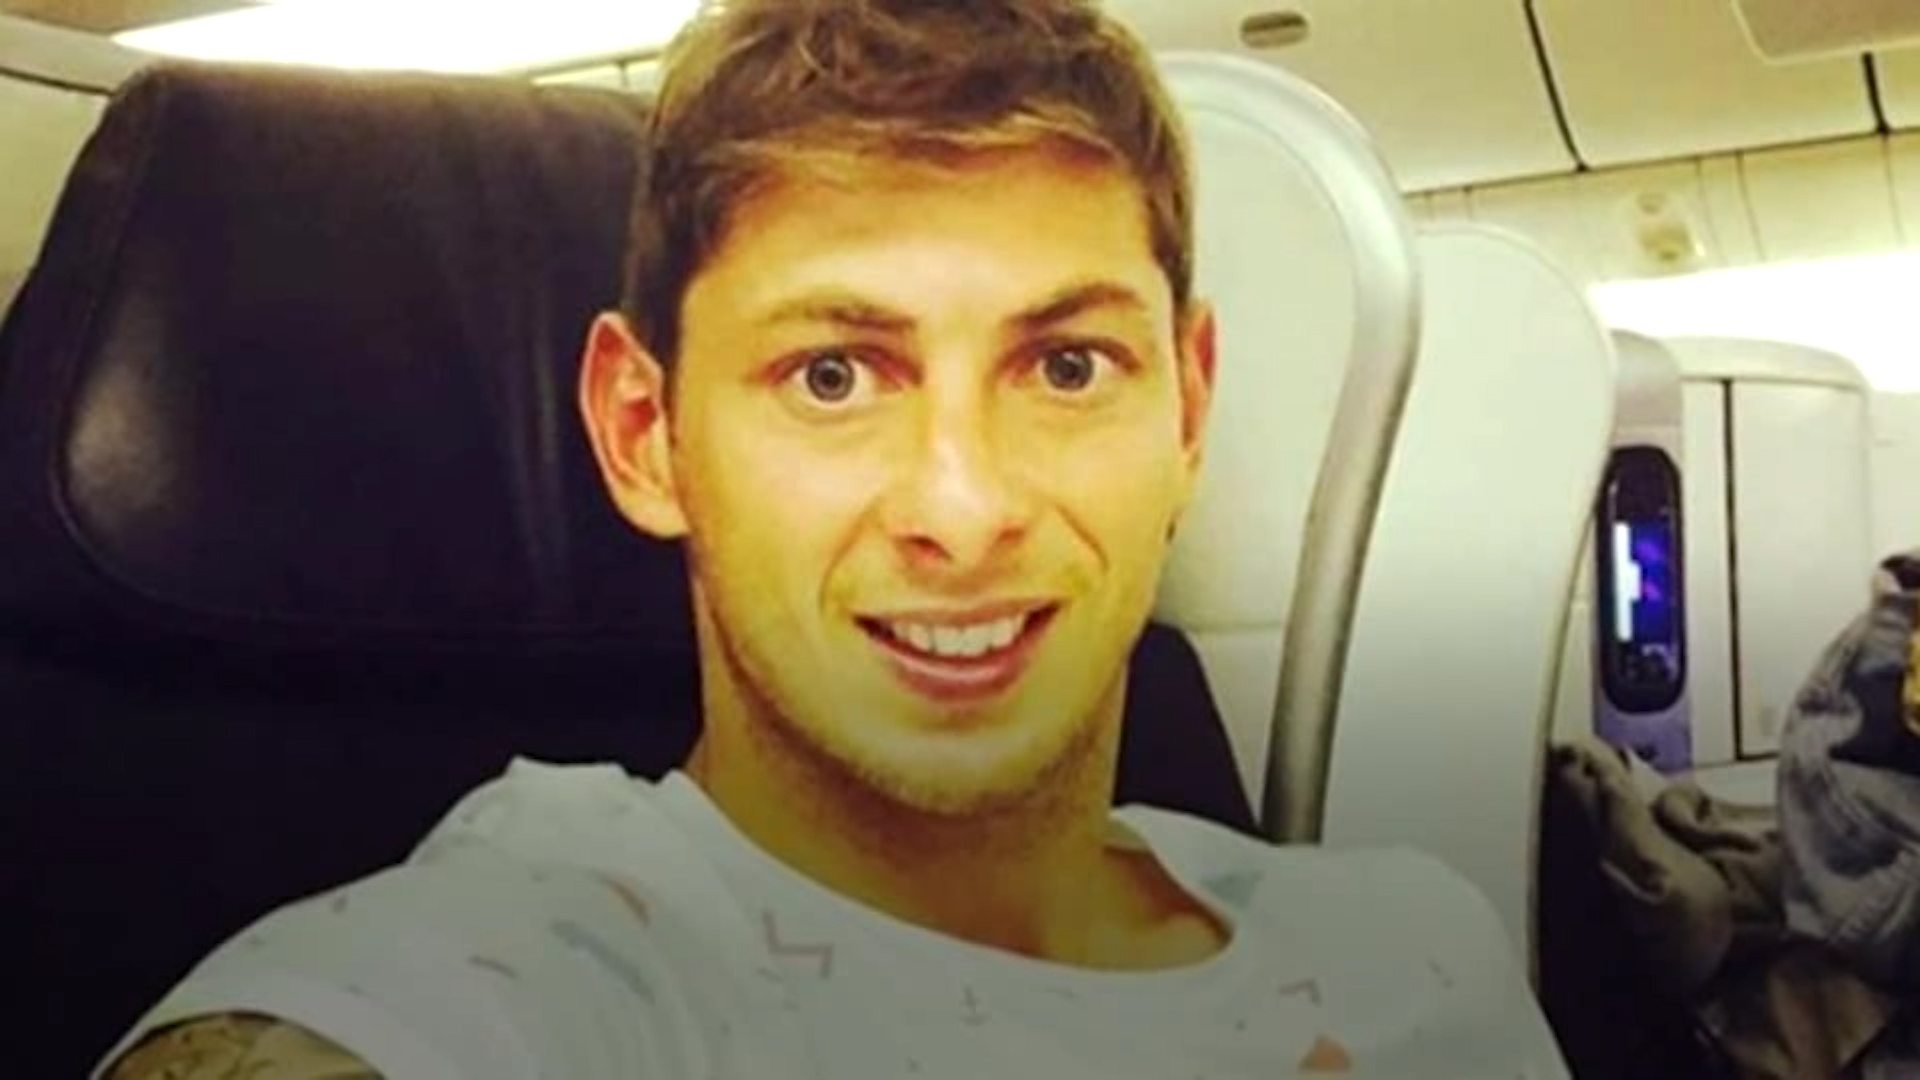 Emiliano Sala was flying to Cardiff on January 21, 2019 when the plane fell over the English Channel